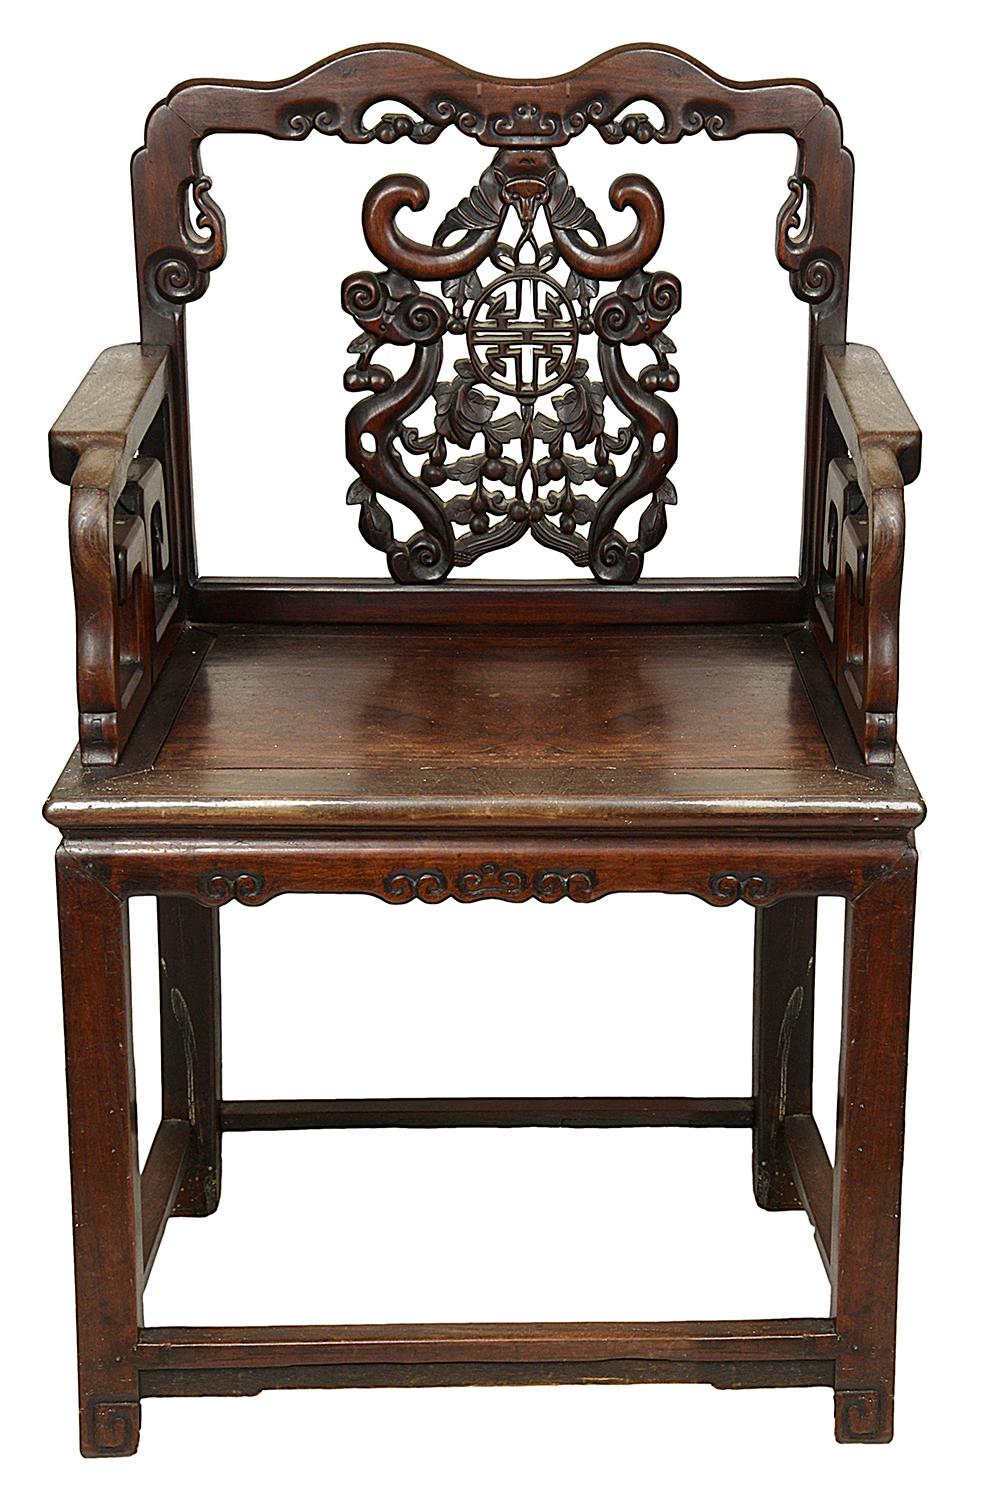 A good quality pair of 19th century Chinese hardwood arm chairs, each with carved bats above a motif and surrounded by cherries and leaves, raised on square section legs united by stretchers.